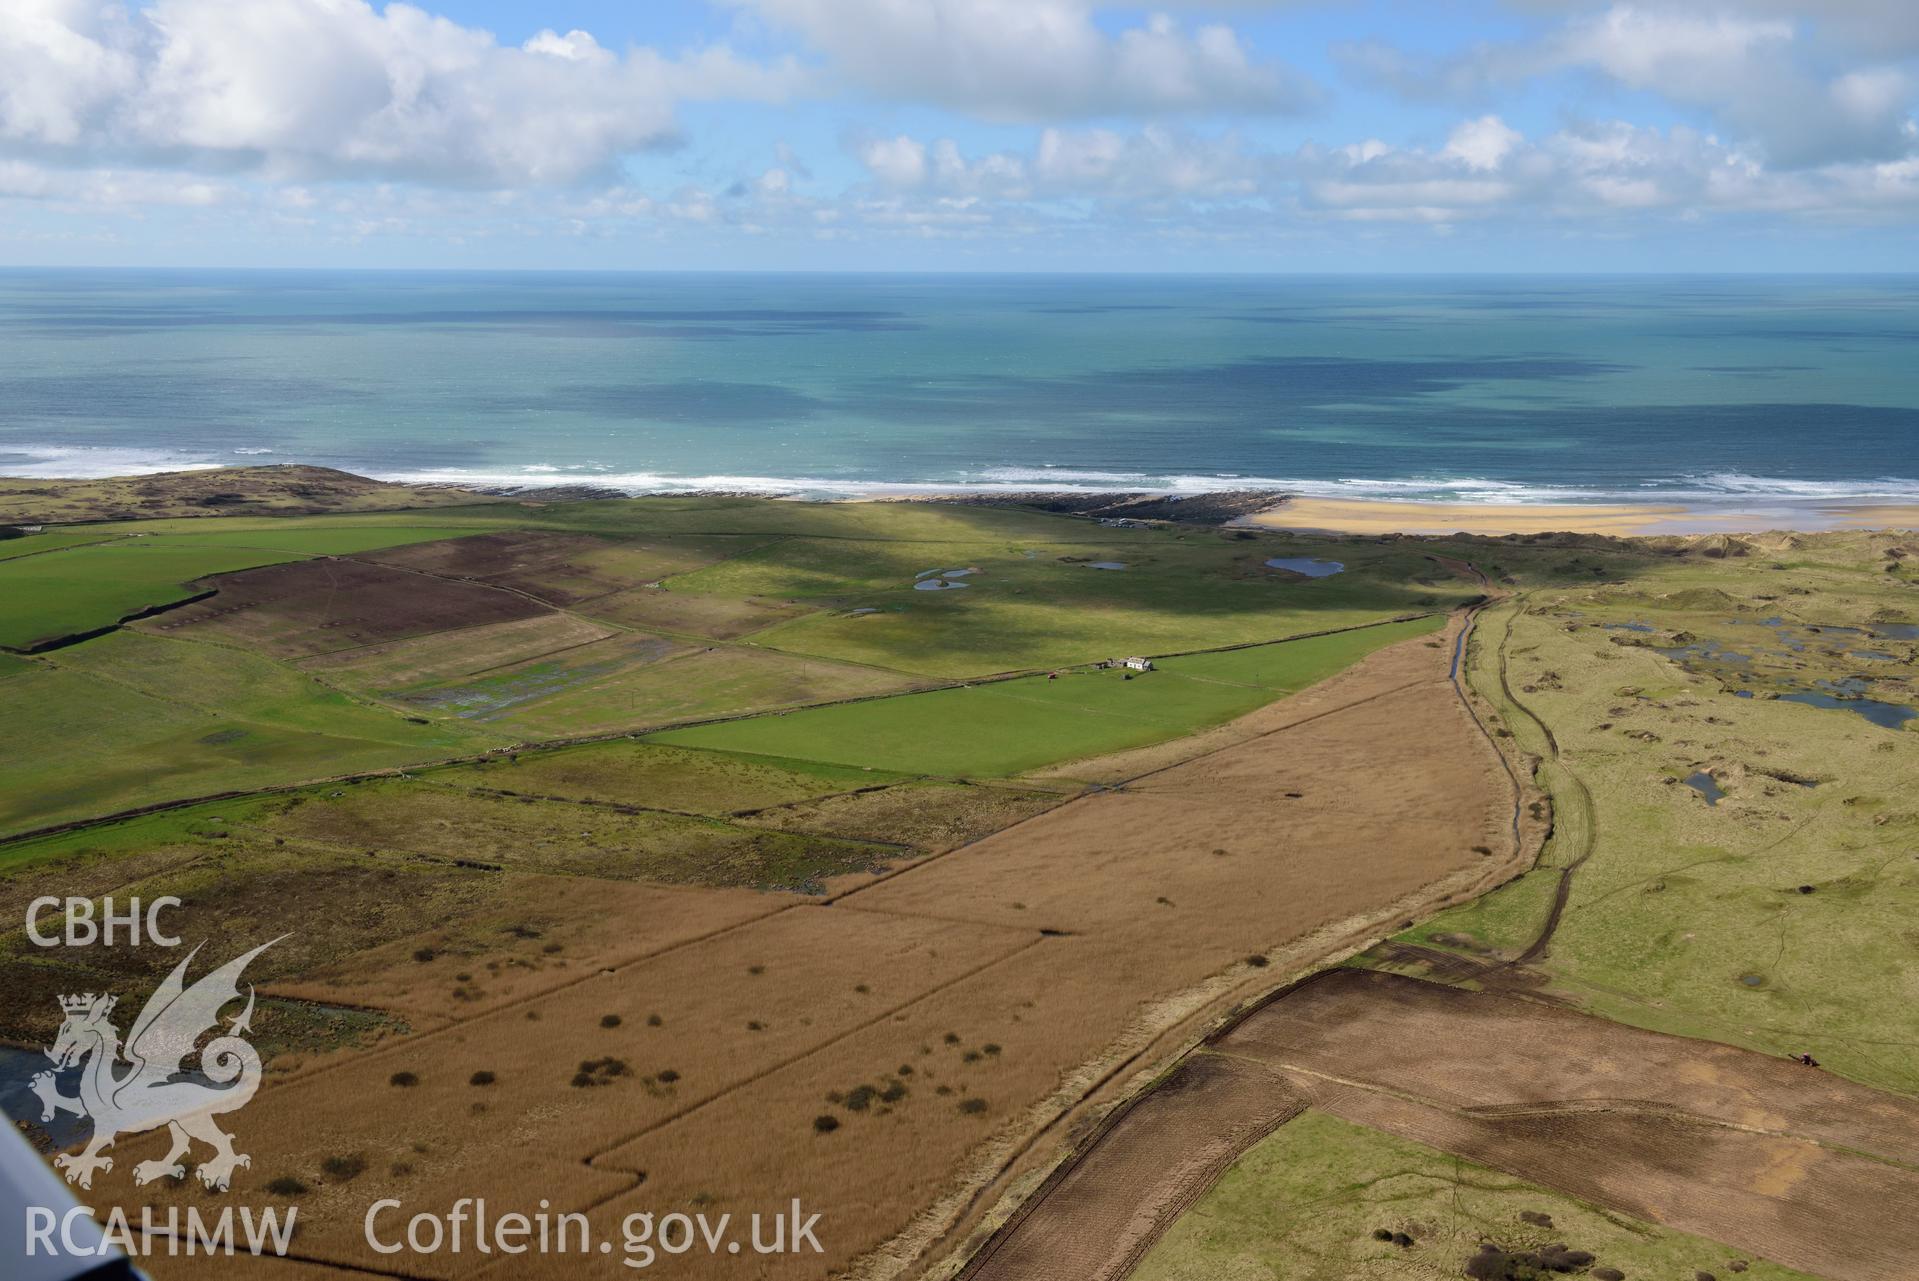 Castlemartin Corse wetland. Baseline aerial reconnaissance survey for the CHERISH Project. ? Crown: CHERISH PROJECT 2018. Produced with EU funds through the Ireland Wales Co-operation Programme 2014-2020. All material made freely available through the Open Government Licence.